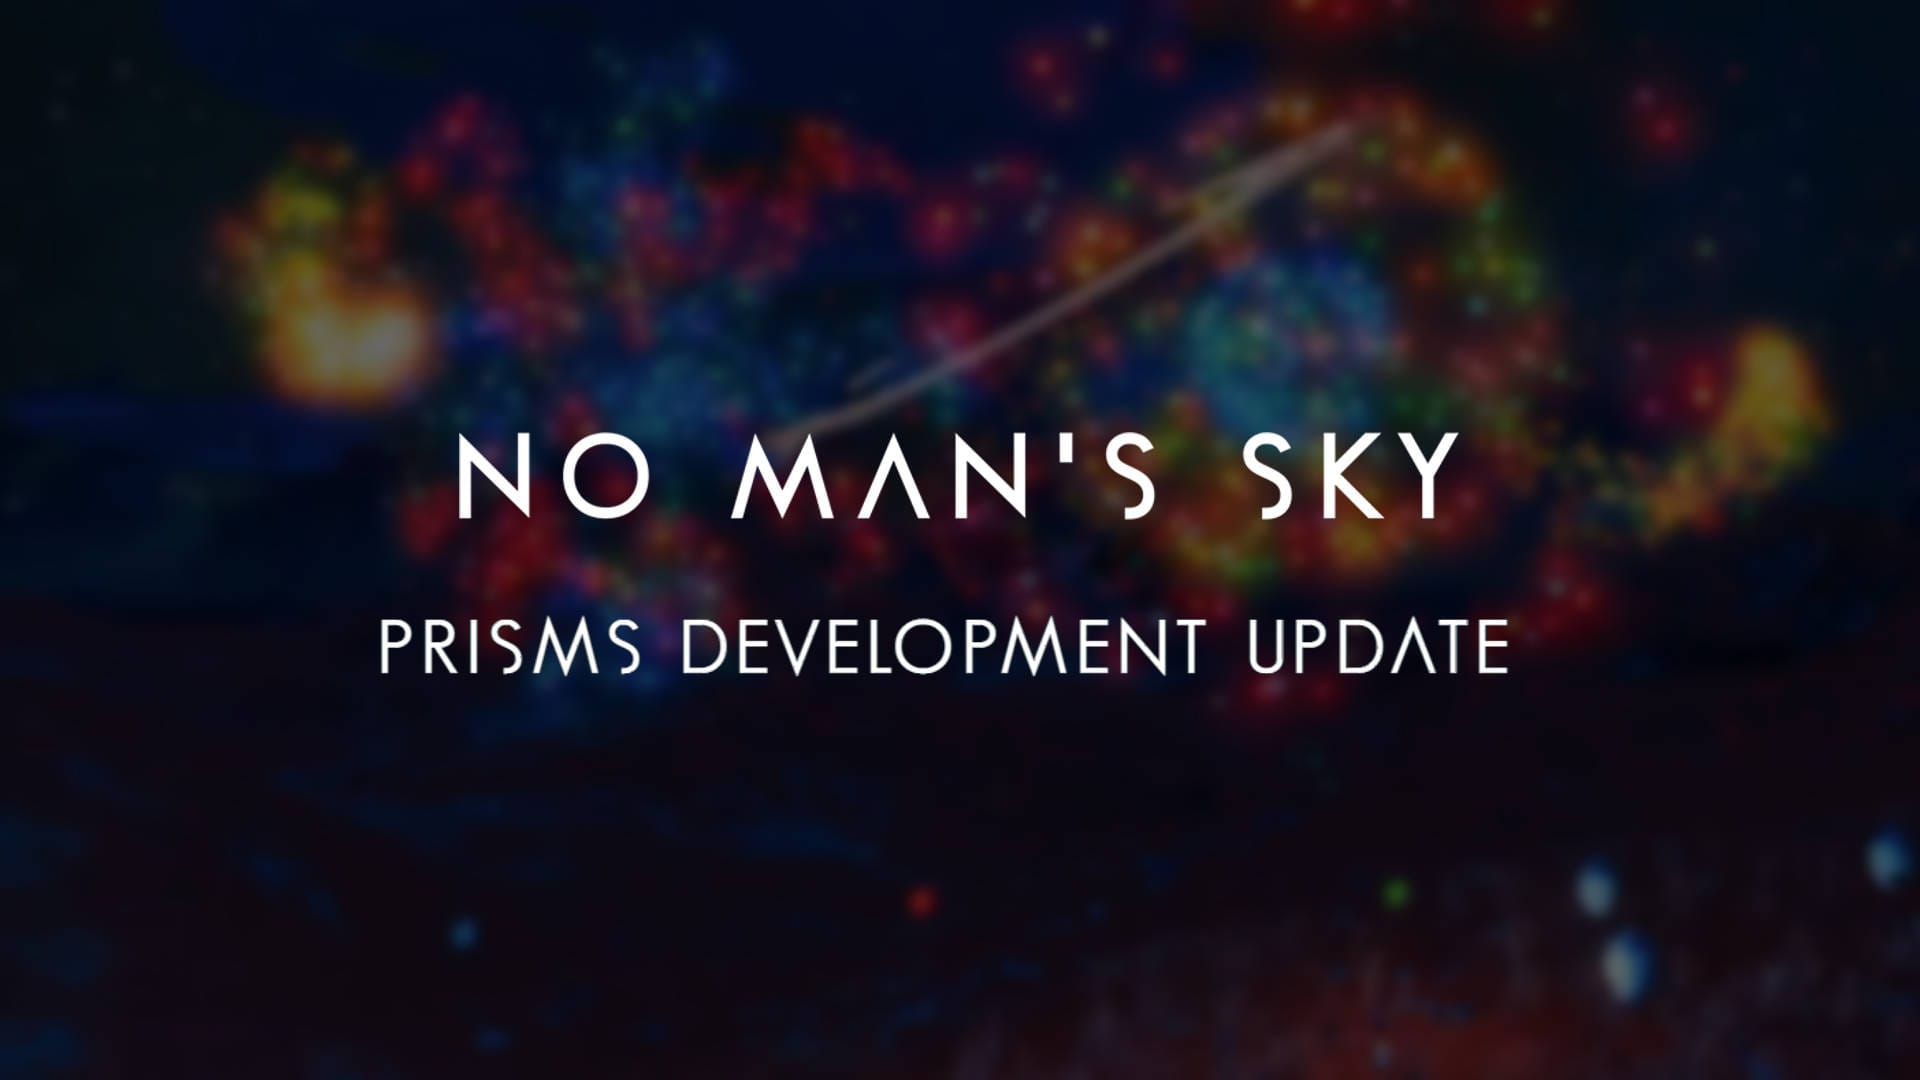 No Man's Sky Update fireworks cover